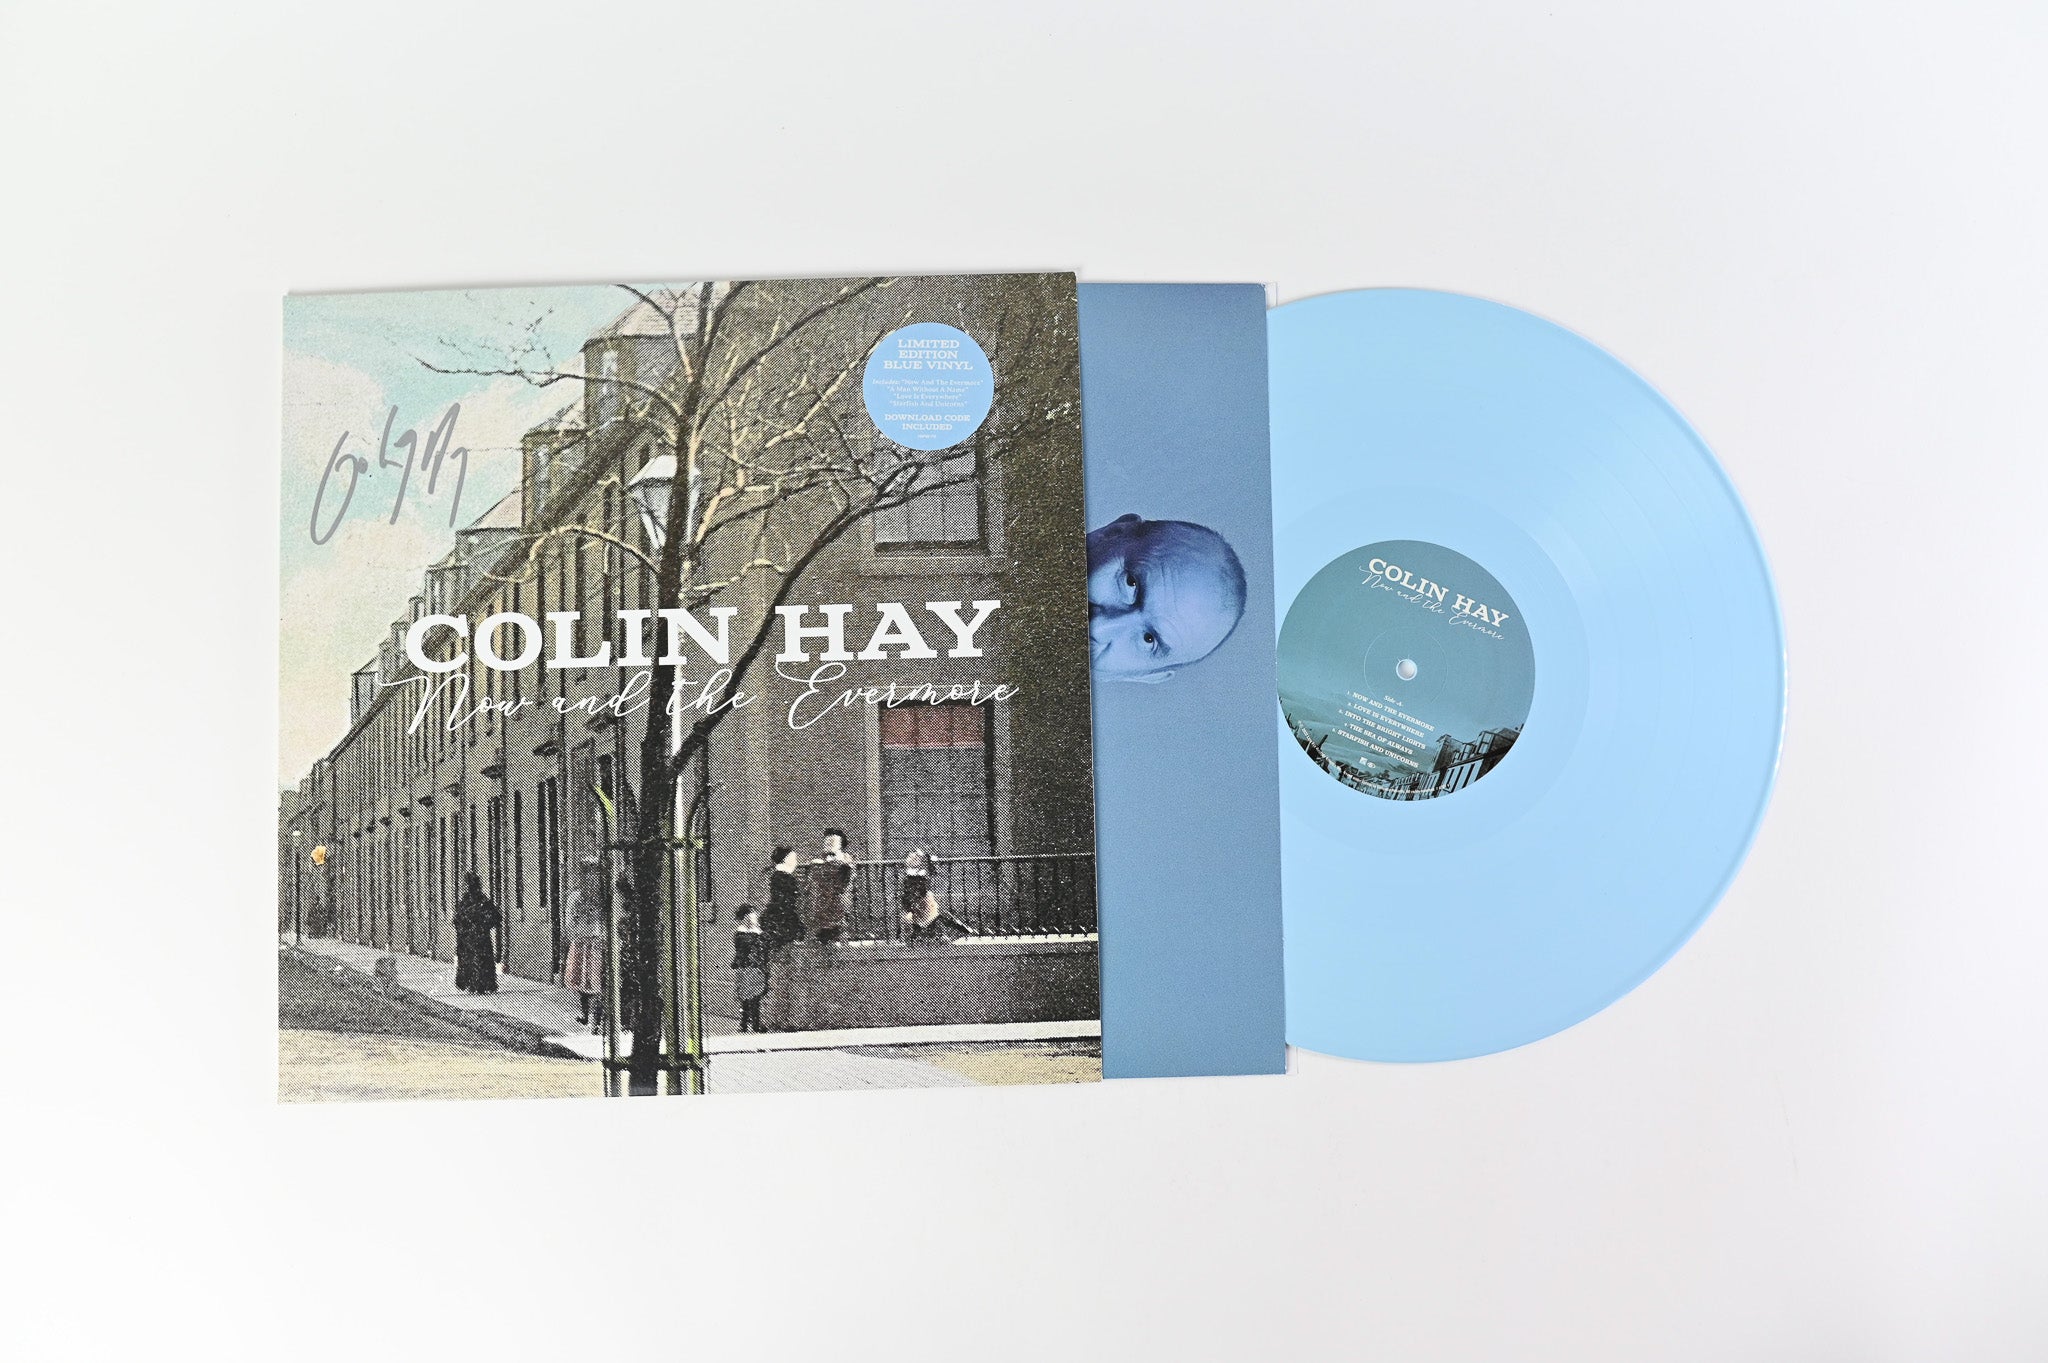 Colin Hay - Now And The Evermore on Compass Records - Blue Vinyl